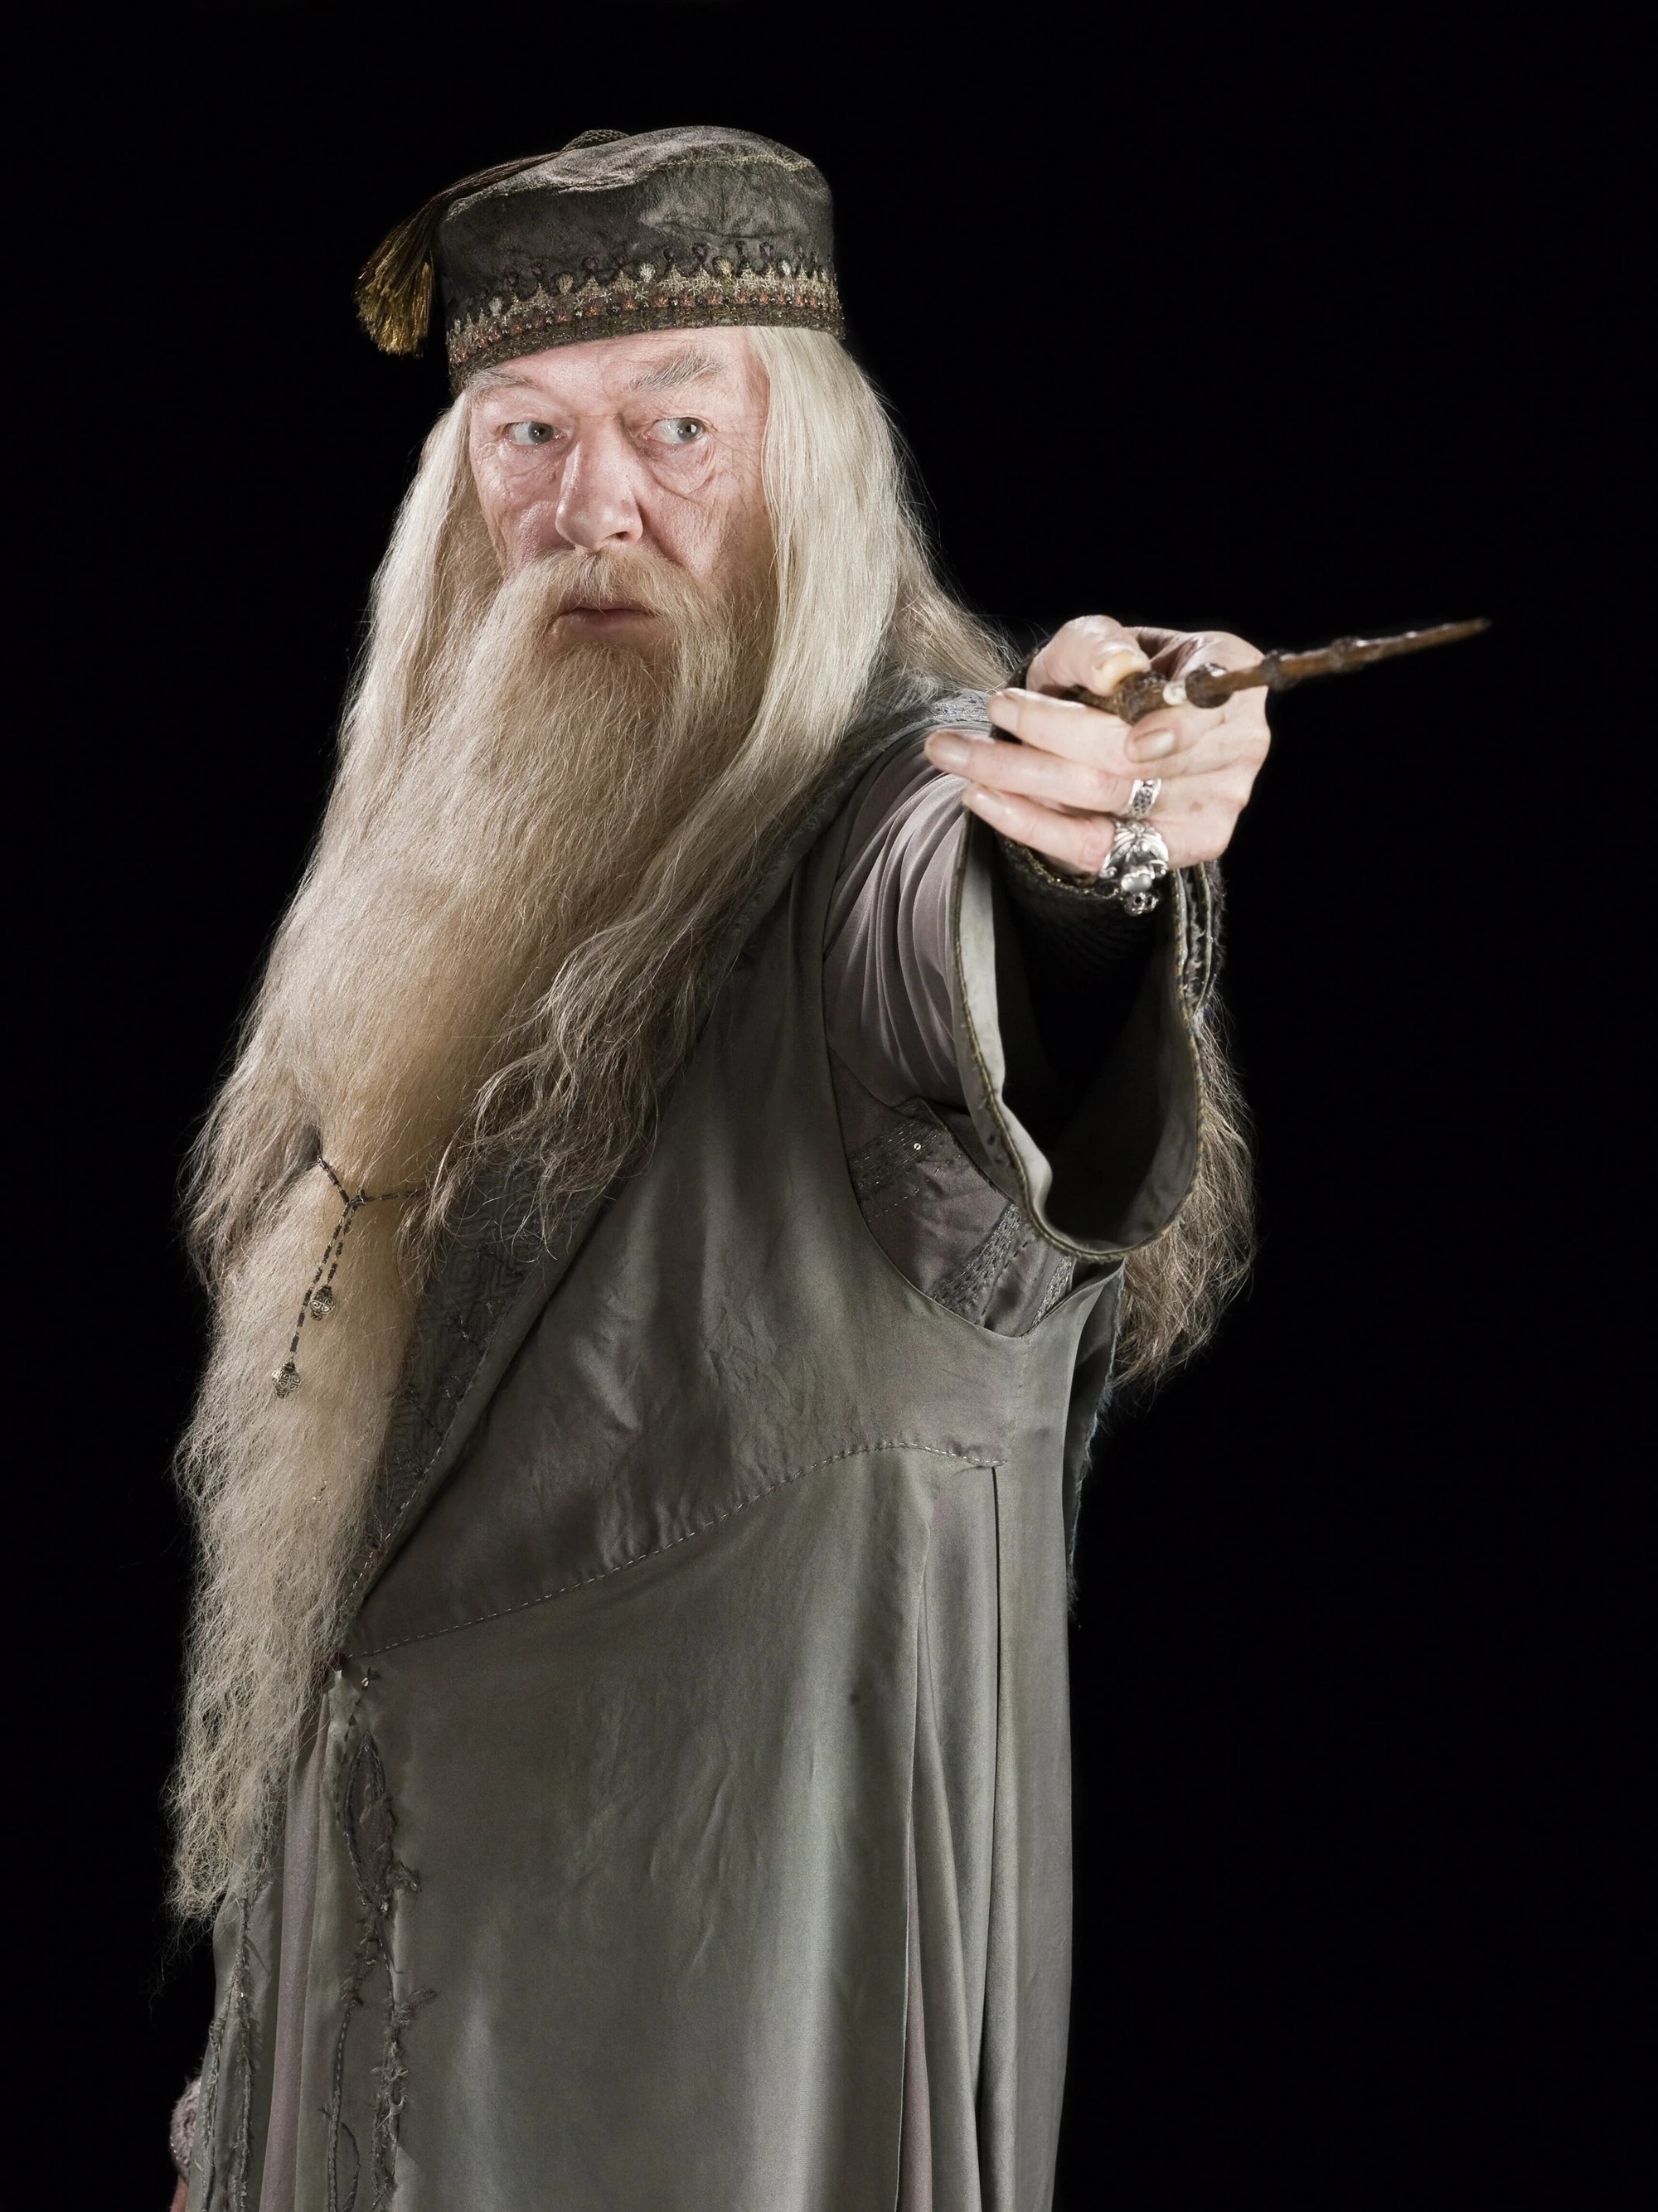 Albus Dumbledore | Harry Potter Wiki | FANDOM powered by Wikia